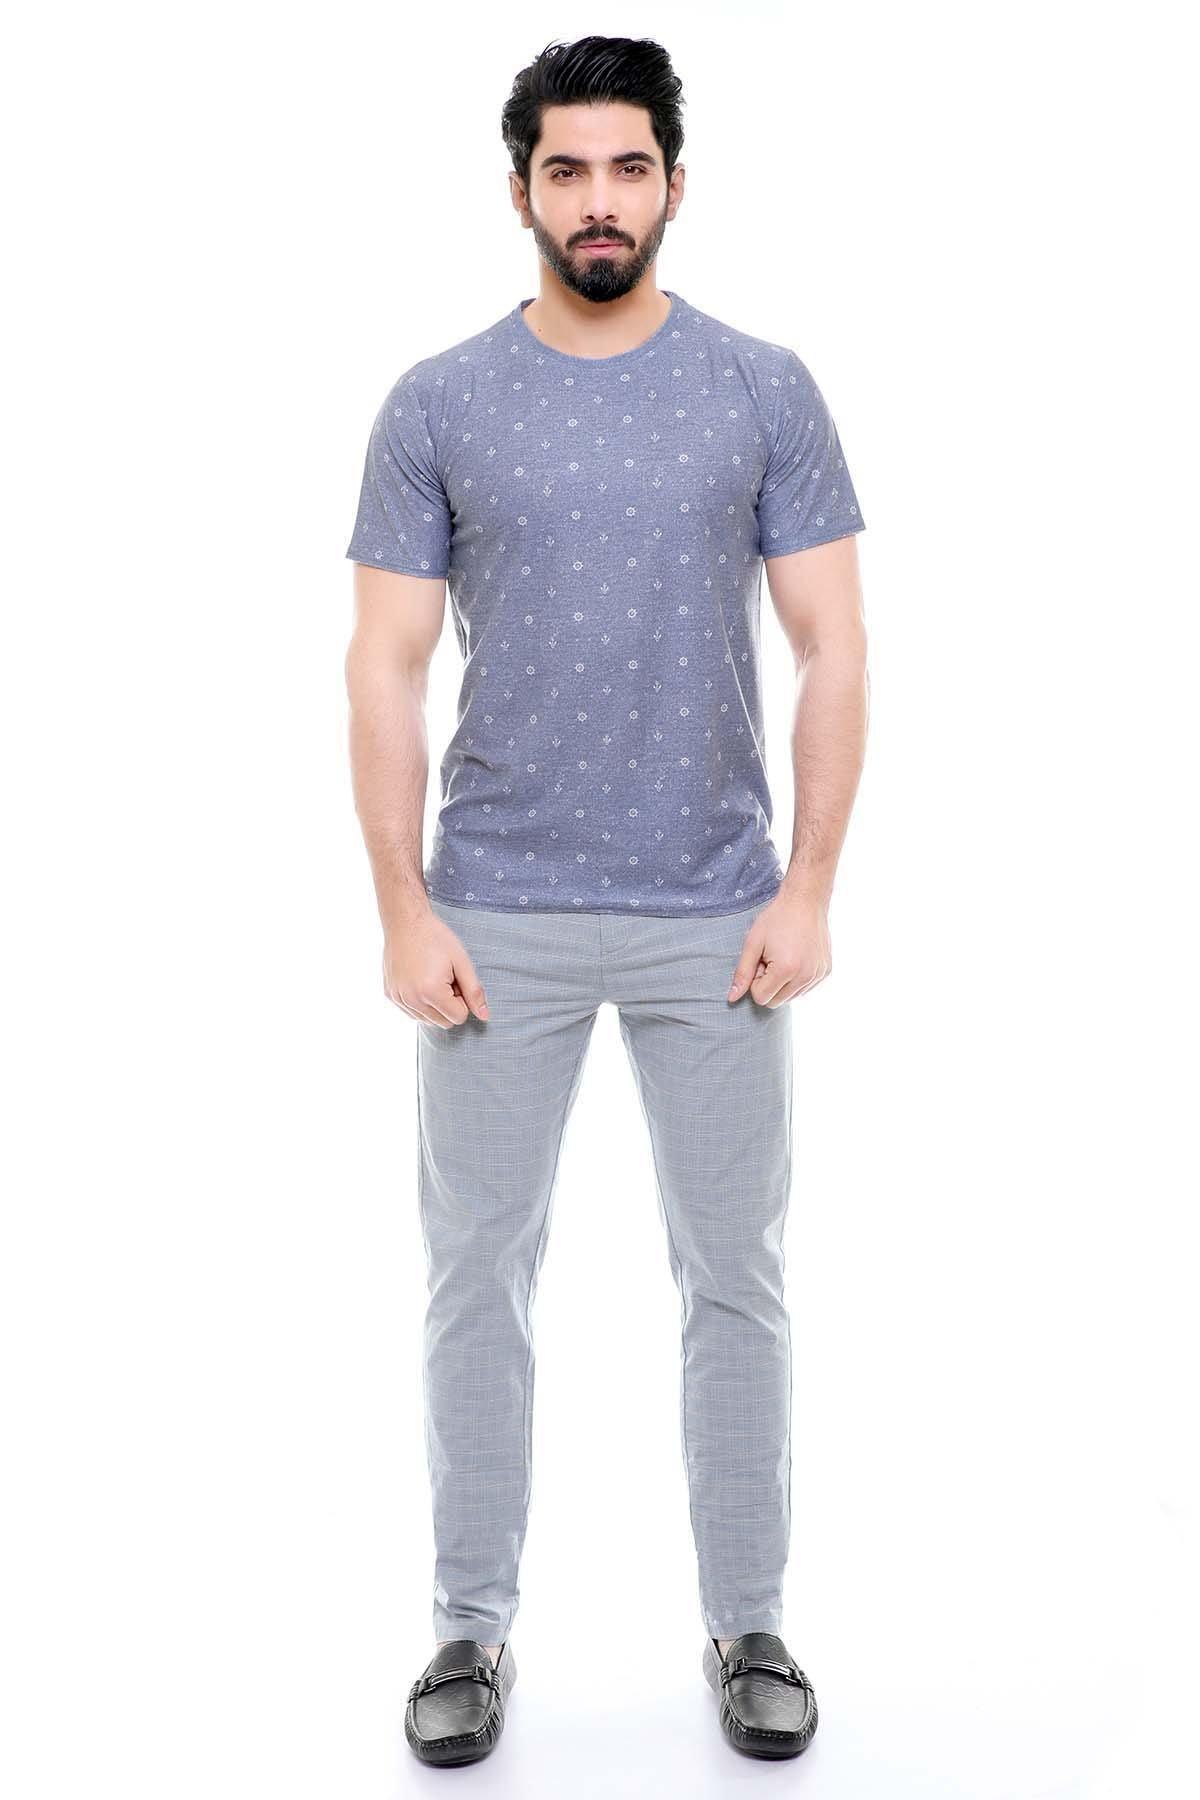 T SHIRT ROUND NECK  BLUE at Charcoal Clothing